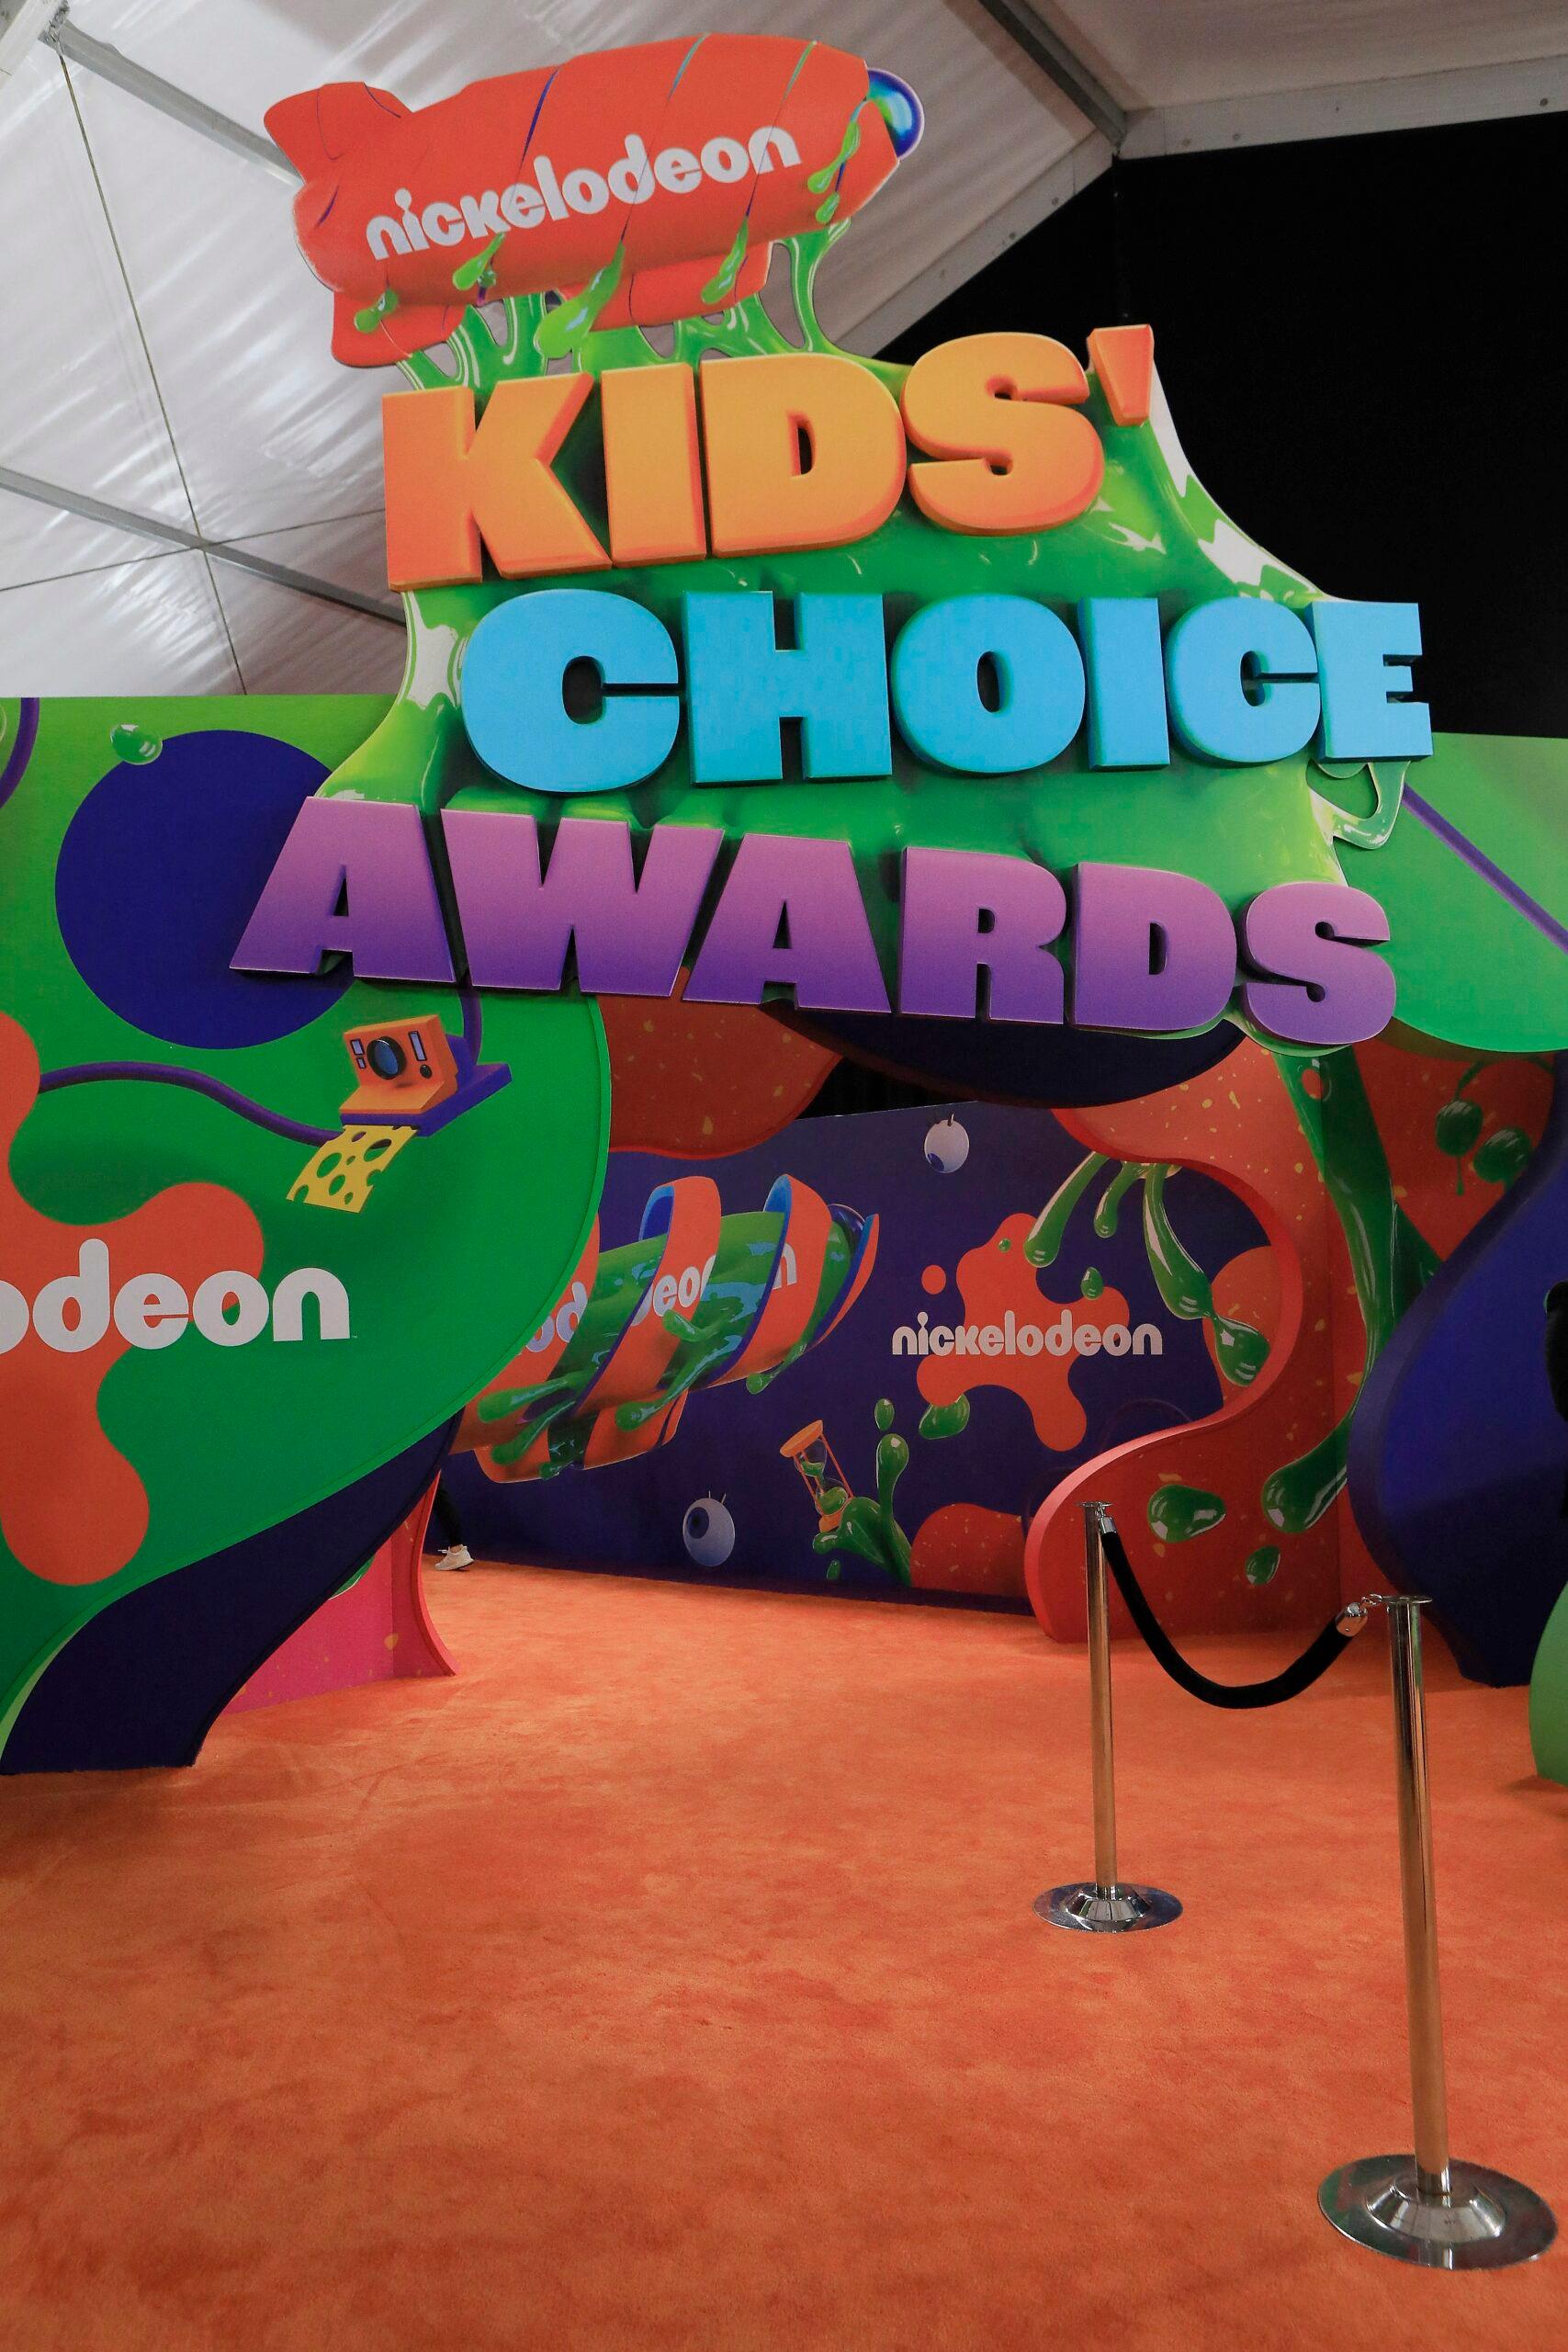 Nickelodeon Allegedly Sent Actors Computers With 'Child P-rn On Them'